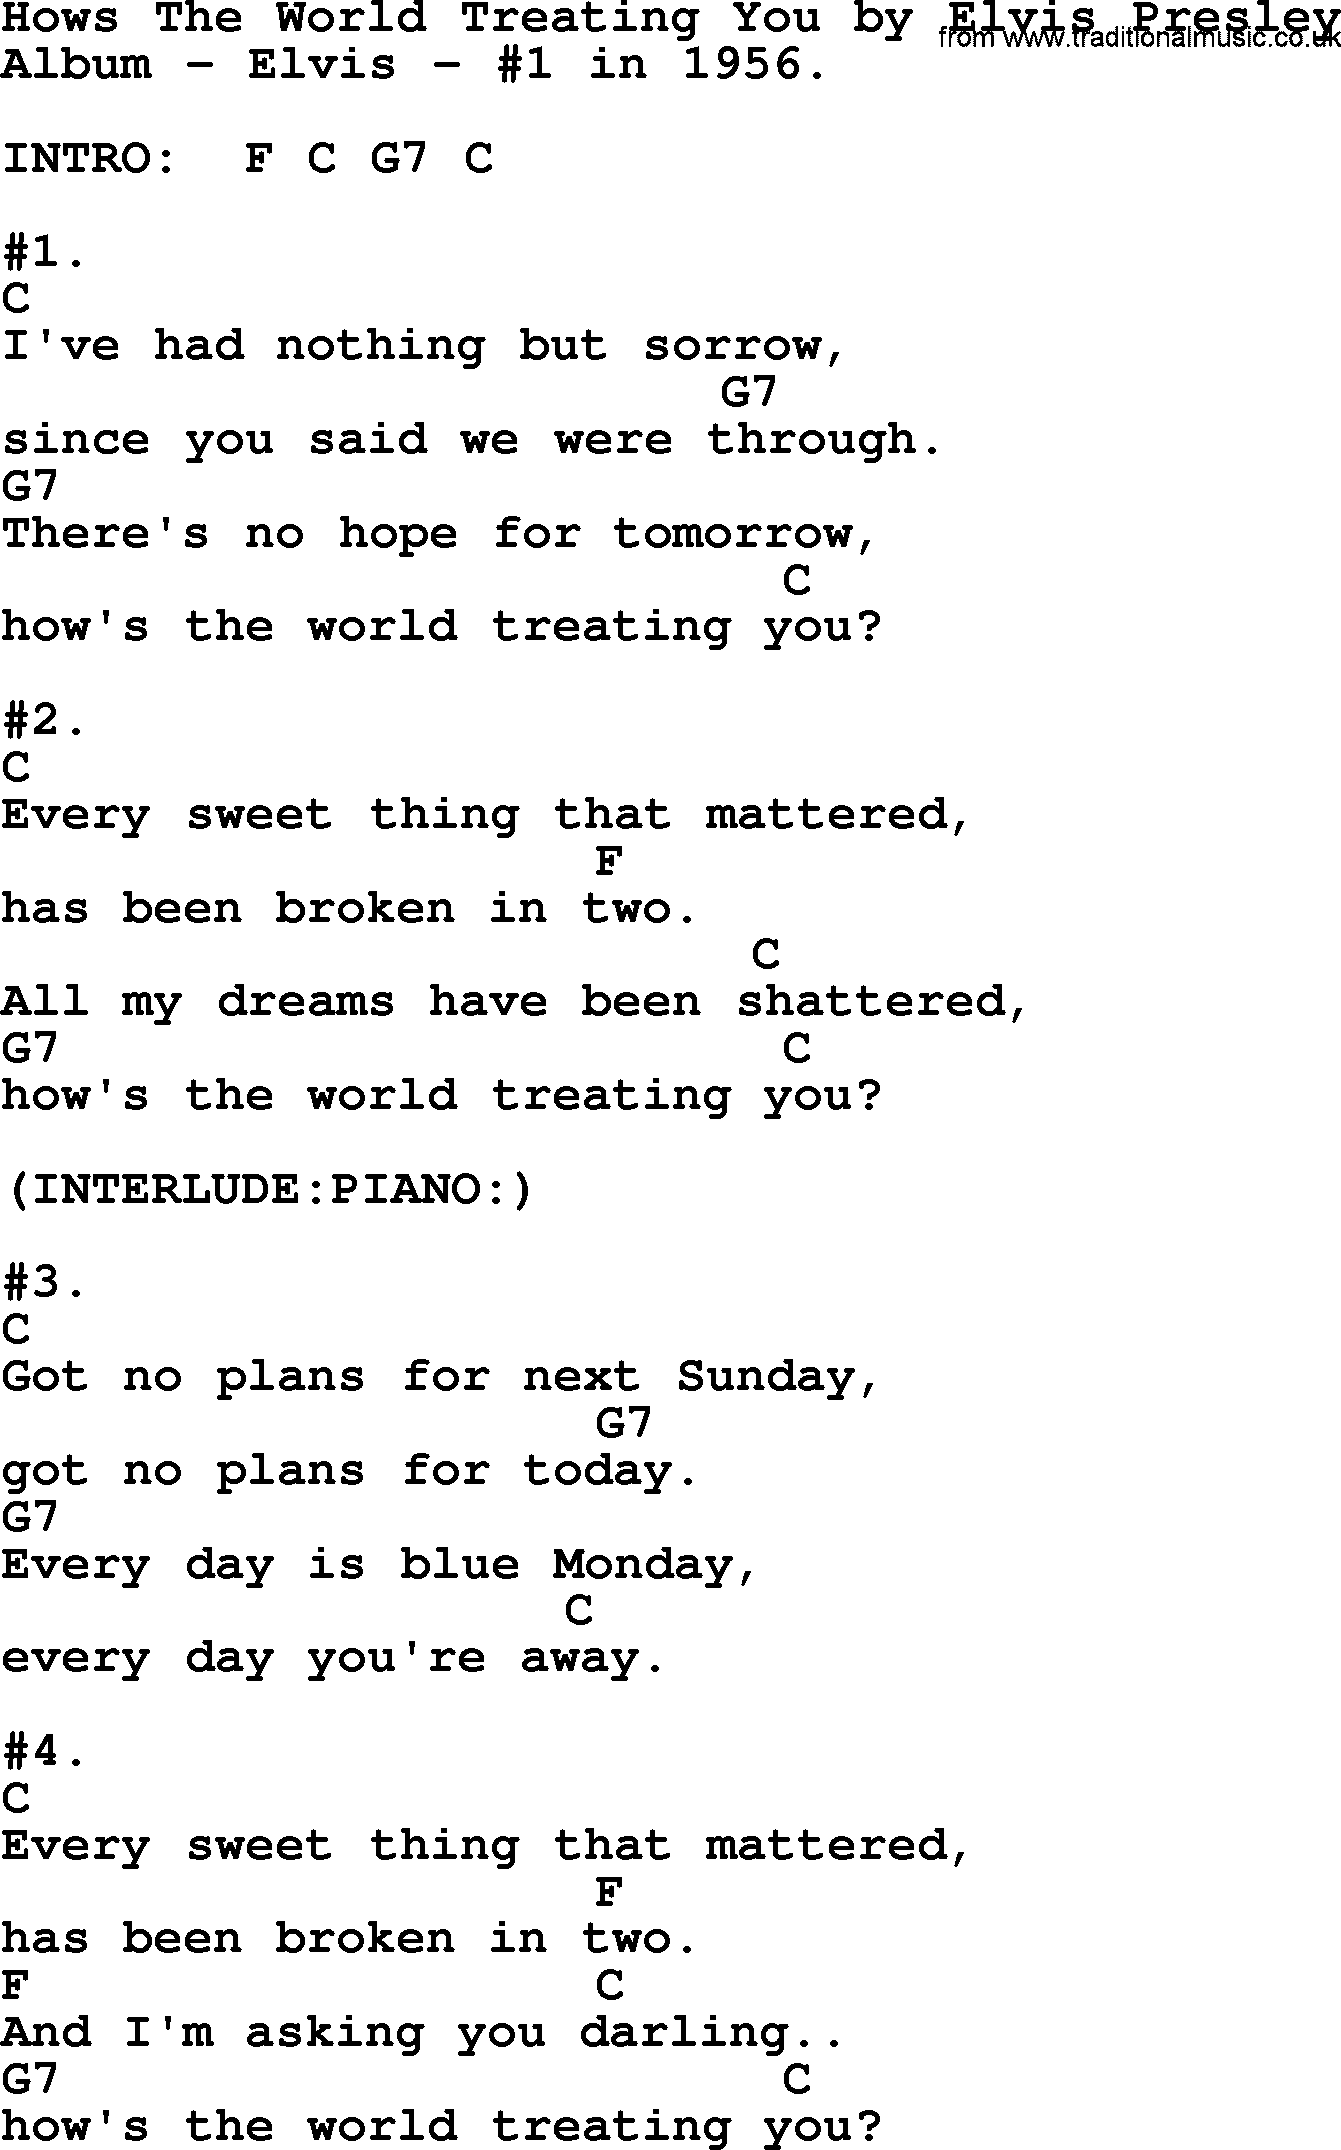 Elvis Presley song: Hows The World Treating You, lyrics and chords